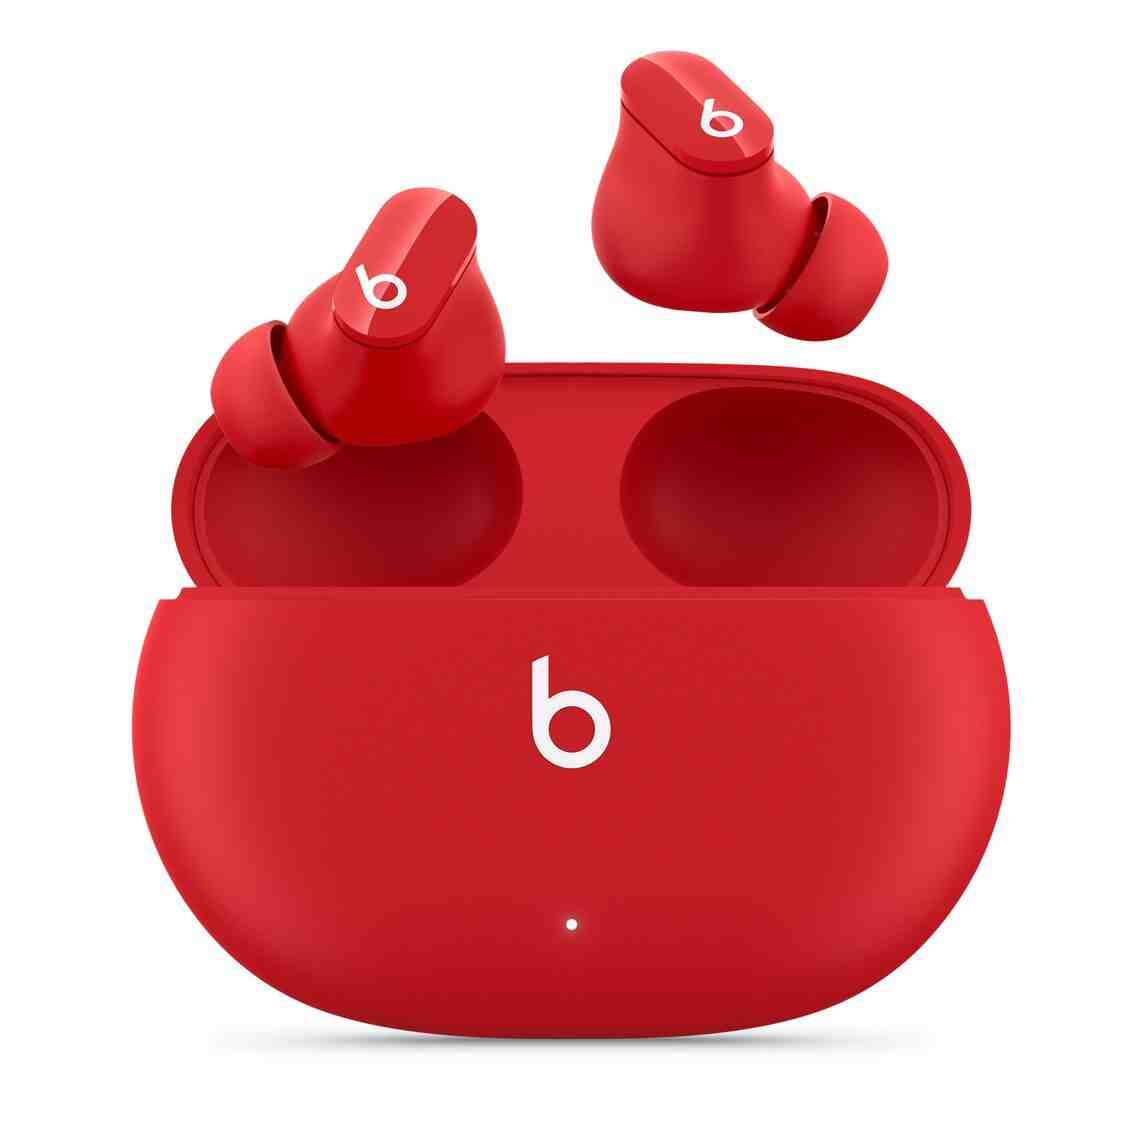 Apple Beats Studio Buds TWS with ANC support launched for $149.99